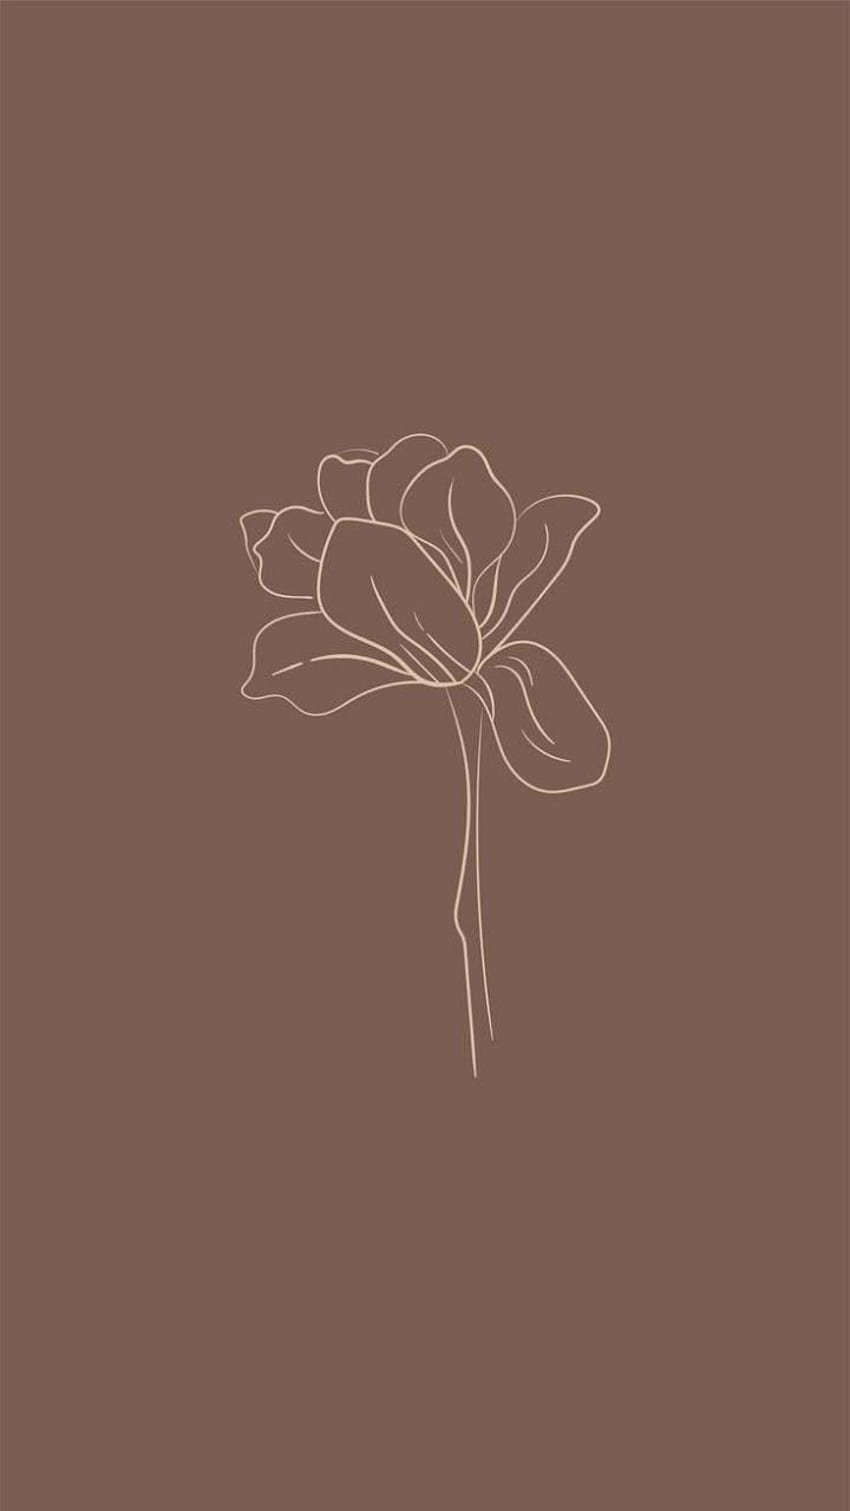 20 Minimalist Brown Wallpaper iPhone Ideas for iPhone  You can  You will  I Take You  Wedding Readings  Wedding Ideas  Wedding Dresses  Wedding  Theme